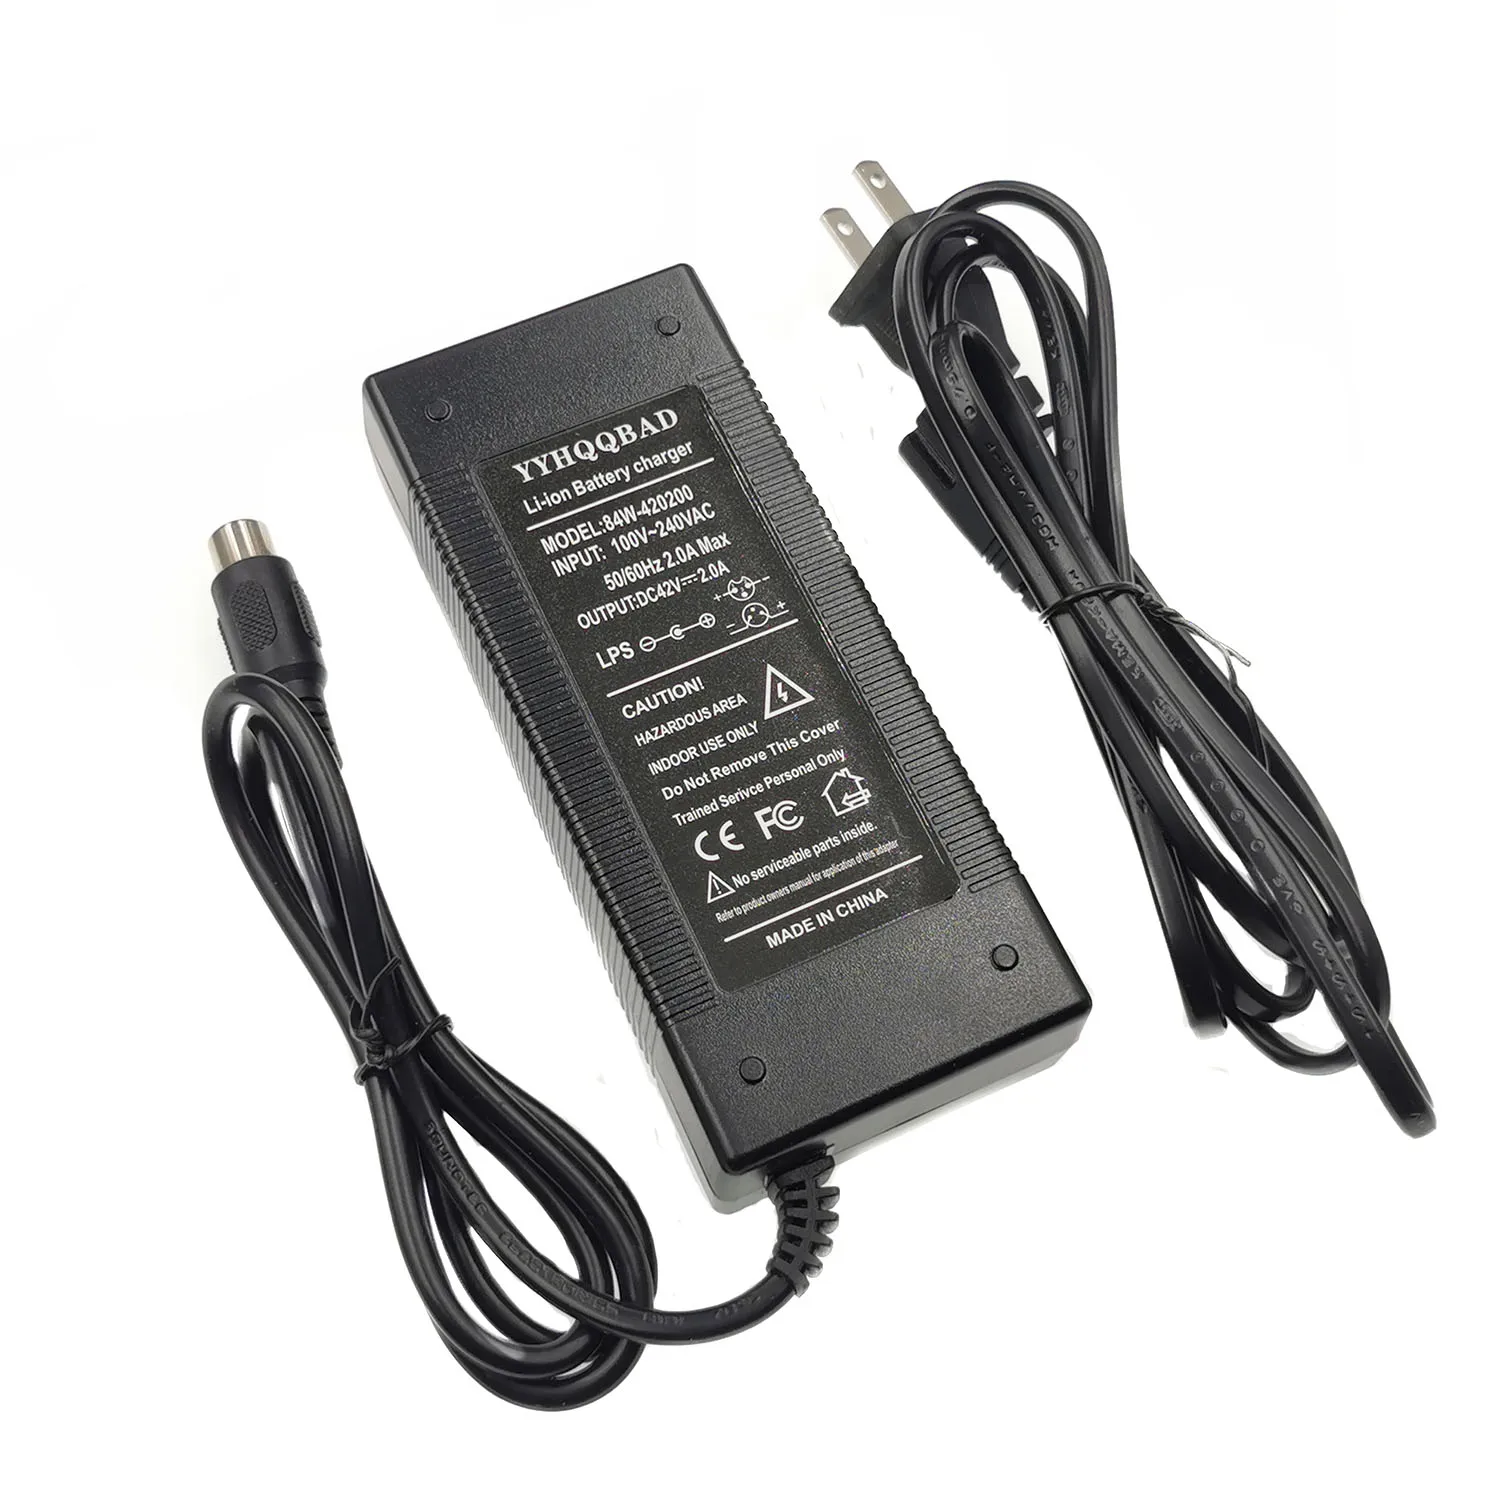 N/C YYHQQBAD 36V 2A Battery Power Supply Adapter Charger Output 42V 2A Charger Input 100-240 VAC Lithium Li-ion Li-Poly Charger for 10Series 36V Electric Bike DC5.52.5MM 